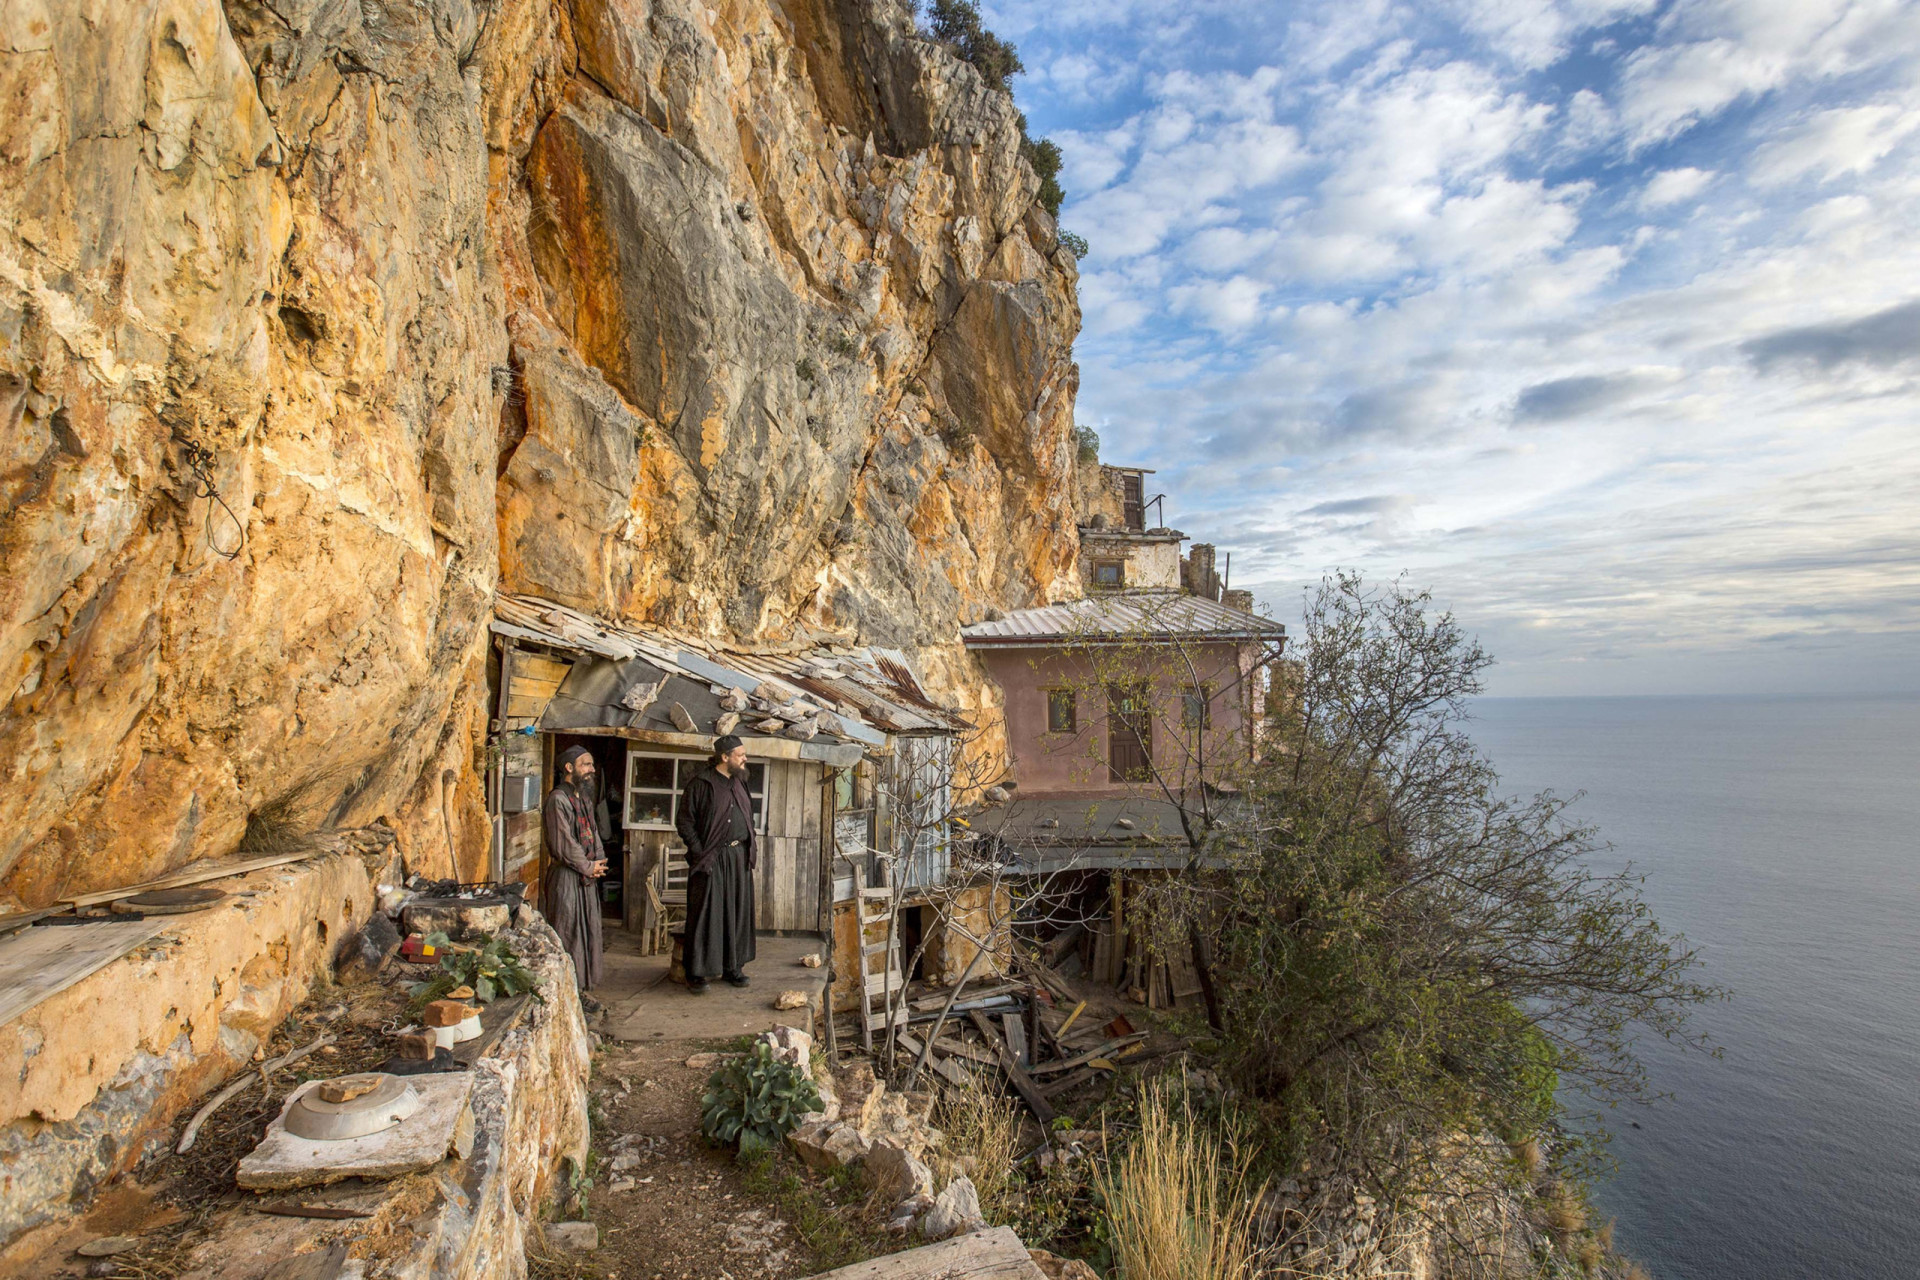 <p>Mount Athos is the oldest surviving independent monastic republic in the world, tracing its roots back to the 5th century. It's believed that John the Evangelist and the Virgin Mary sought shelter there from a storm.</p><p>You may also like:<a href="https://www.starsinsider.com/n/207692?utm_source=msn.com&utm_medium=display&utm_campaign=referral_description&utm_content=524487en-us"> America's secret airline the government doesn't want you to know about</a></p>